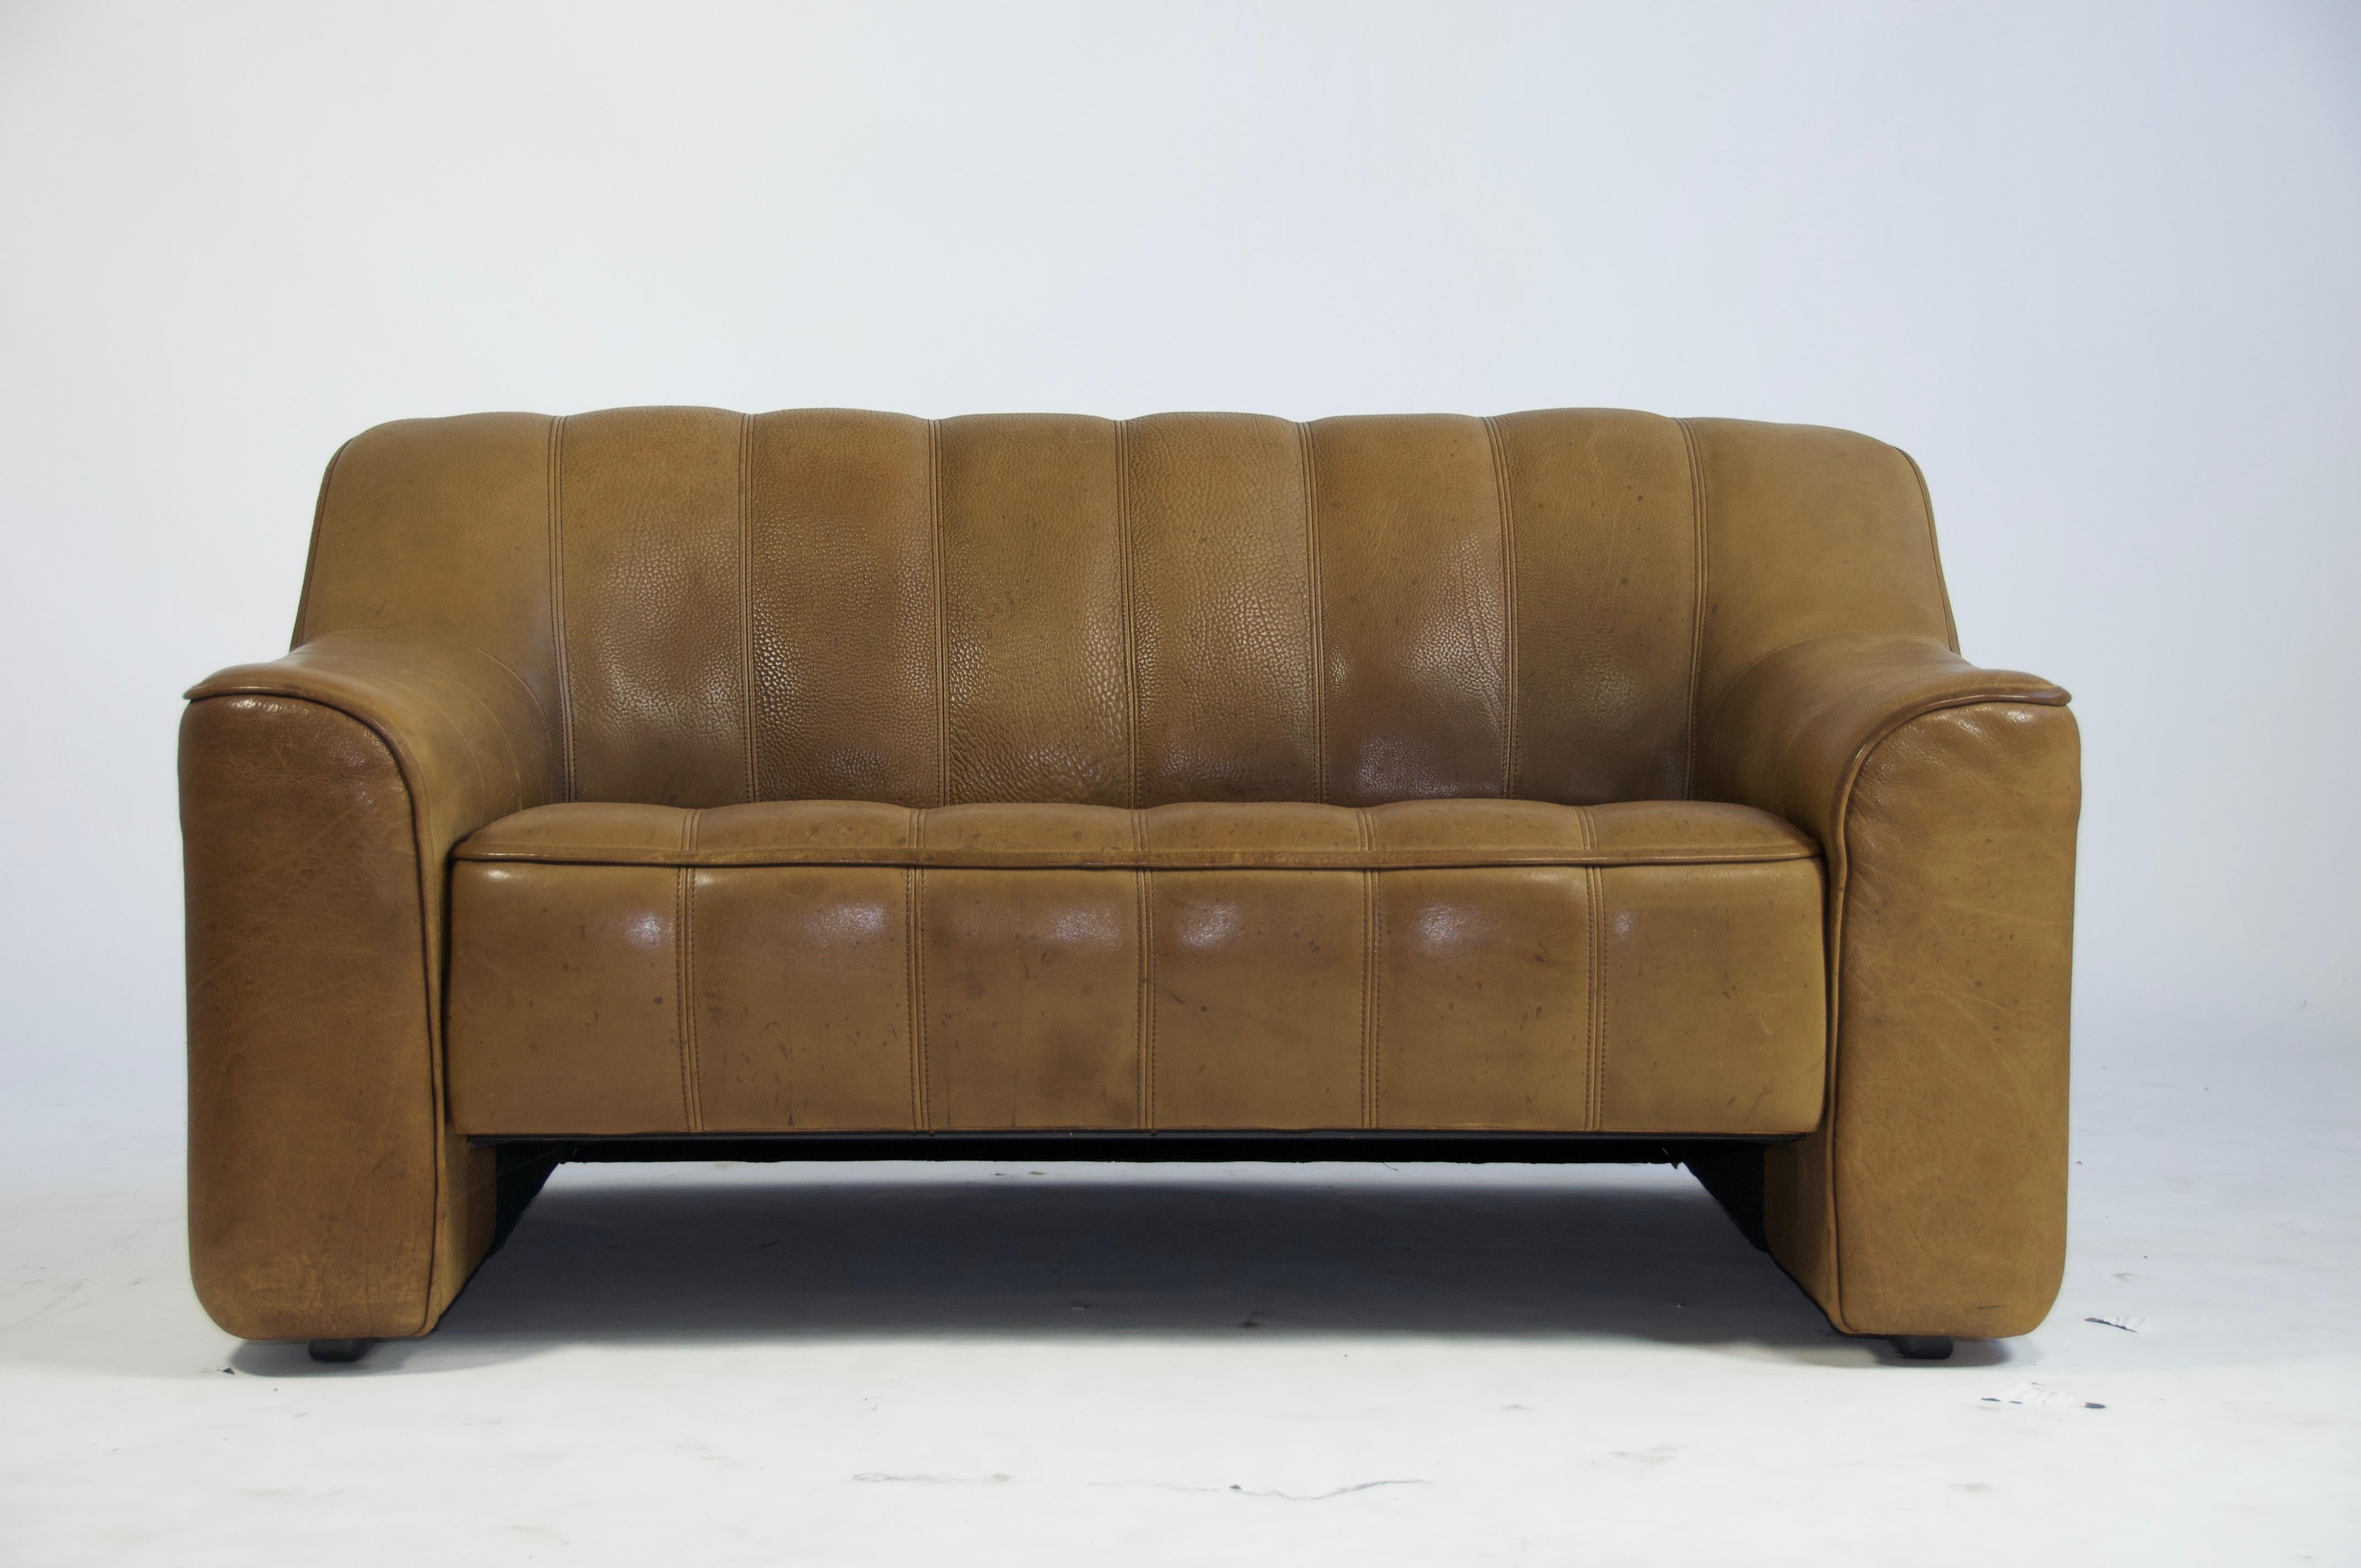 De Sede DS44 two-seat sofa. Upholstered in thick buffalo brown leather. Two adjustable seat positions. Made in Switzerland.